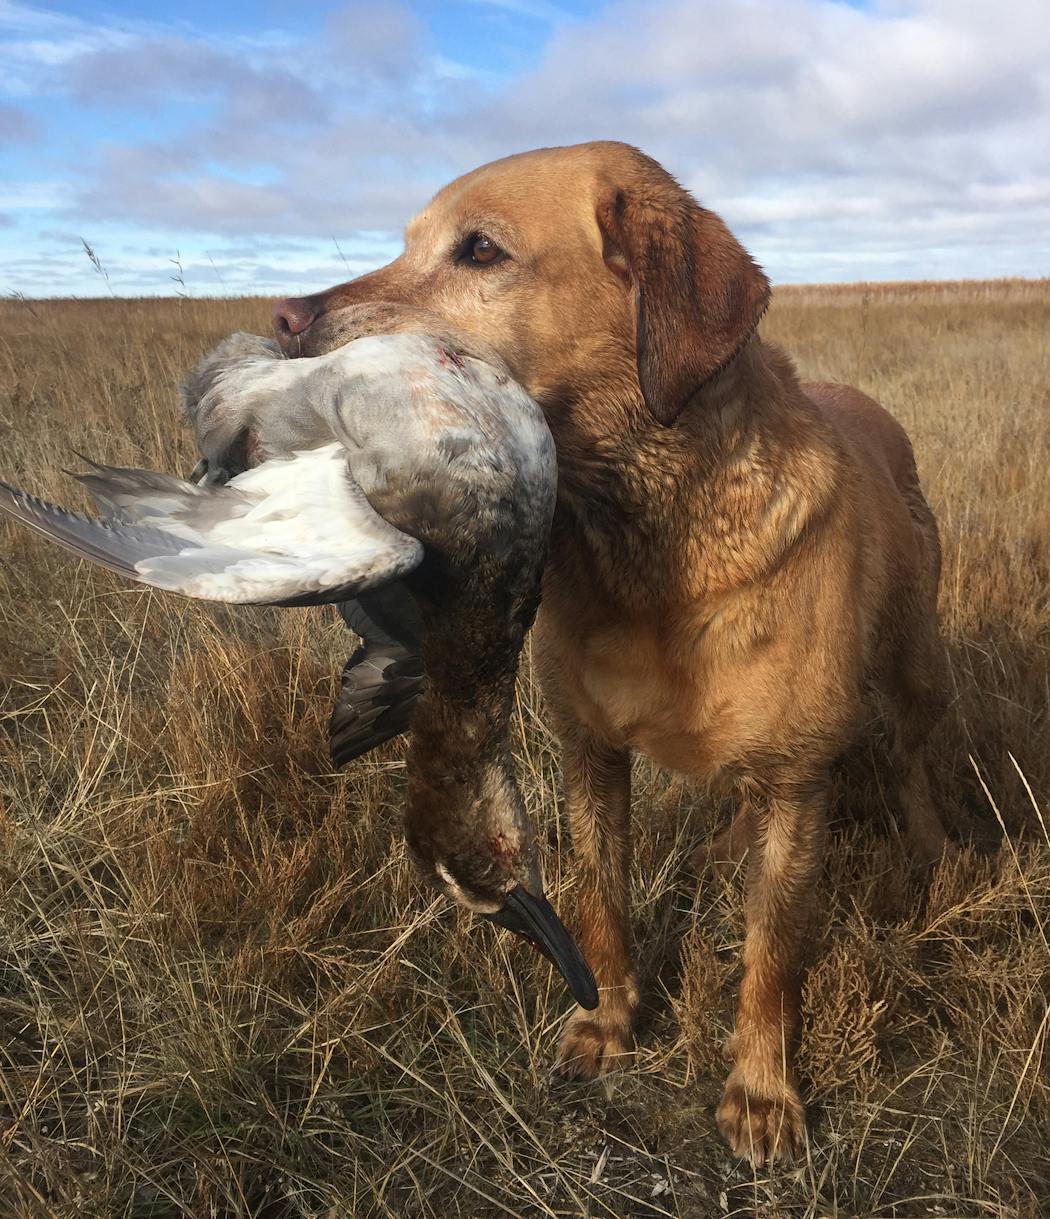 Manitoba is likely to limit the number of U.S. waterfowlers — meaning, primarily, Minnesotans and their retrievers — who can hunt in the province.